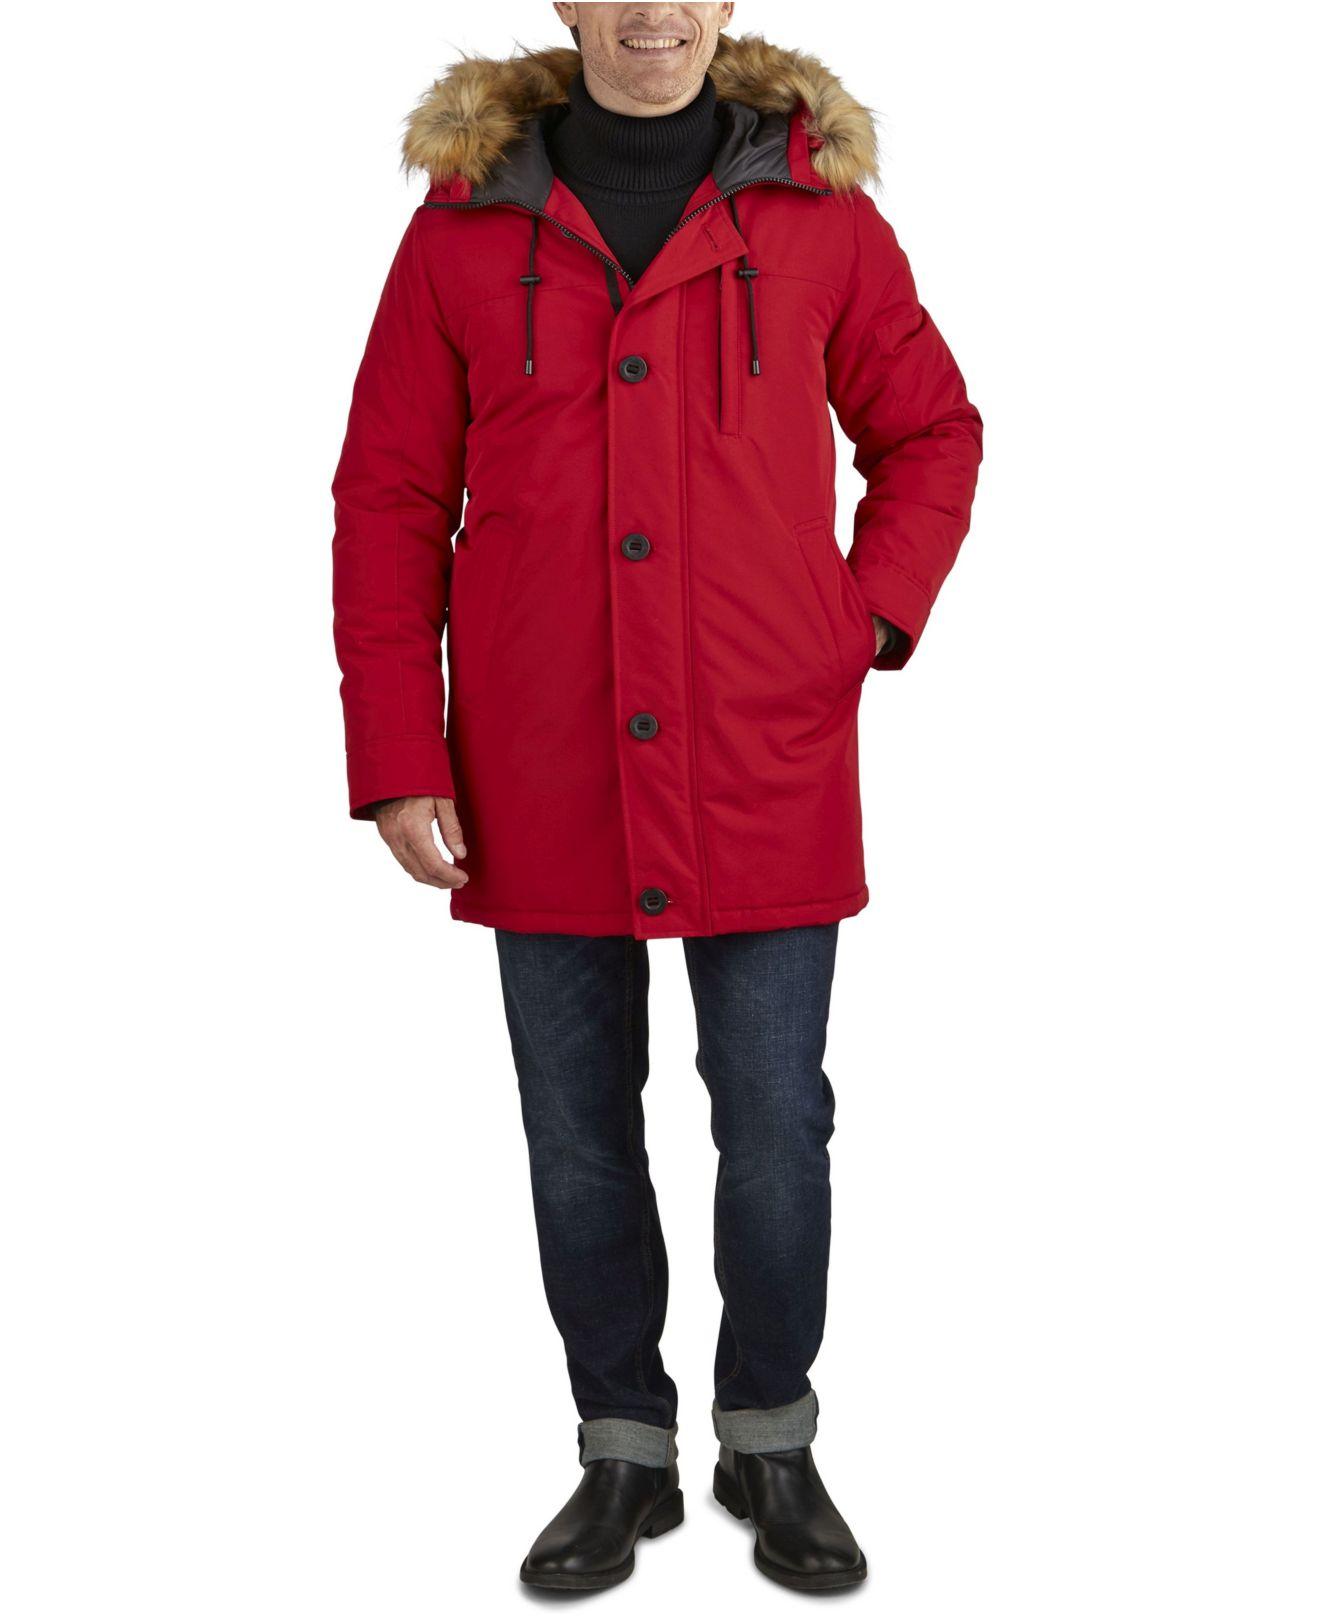 Guess Heavy Weight Parka Jacket in Red for Men - Lyst